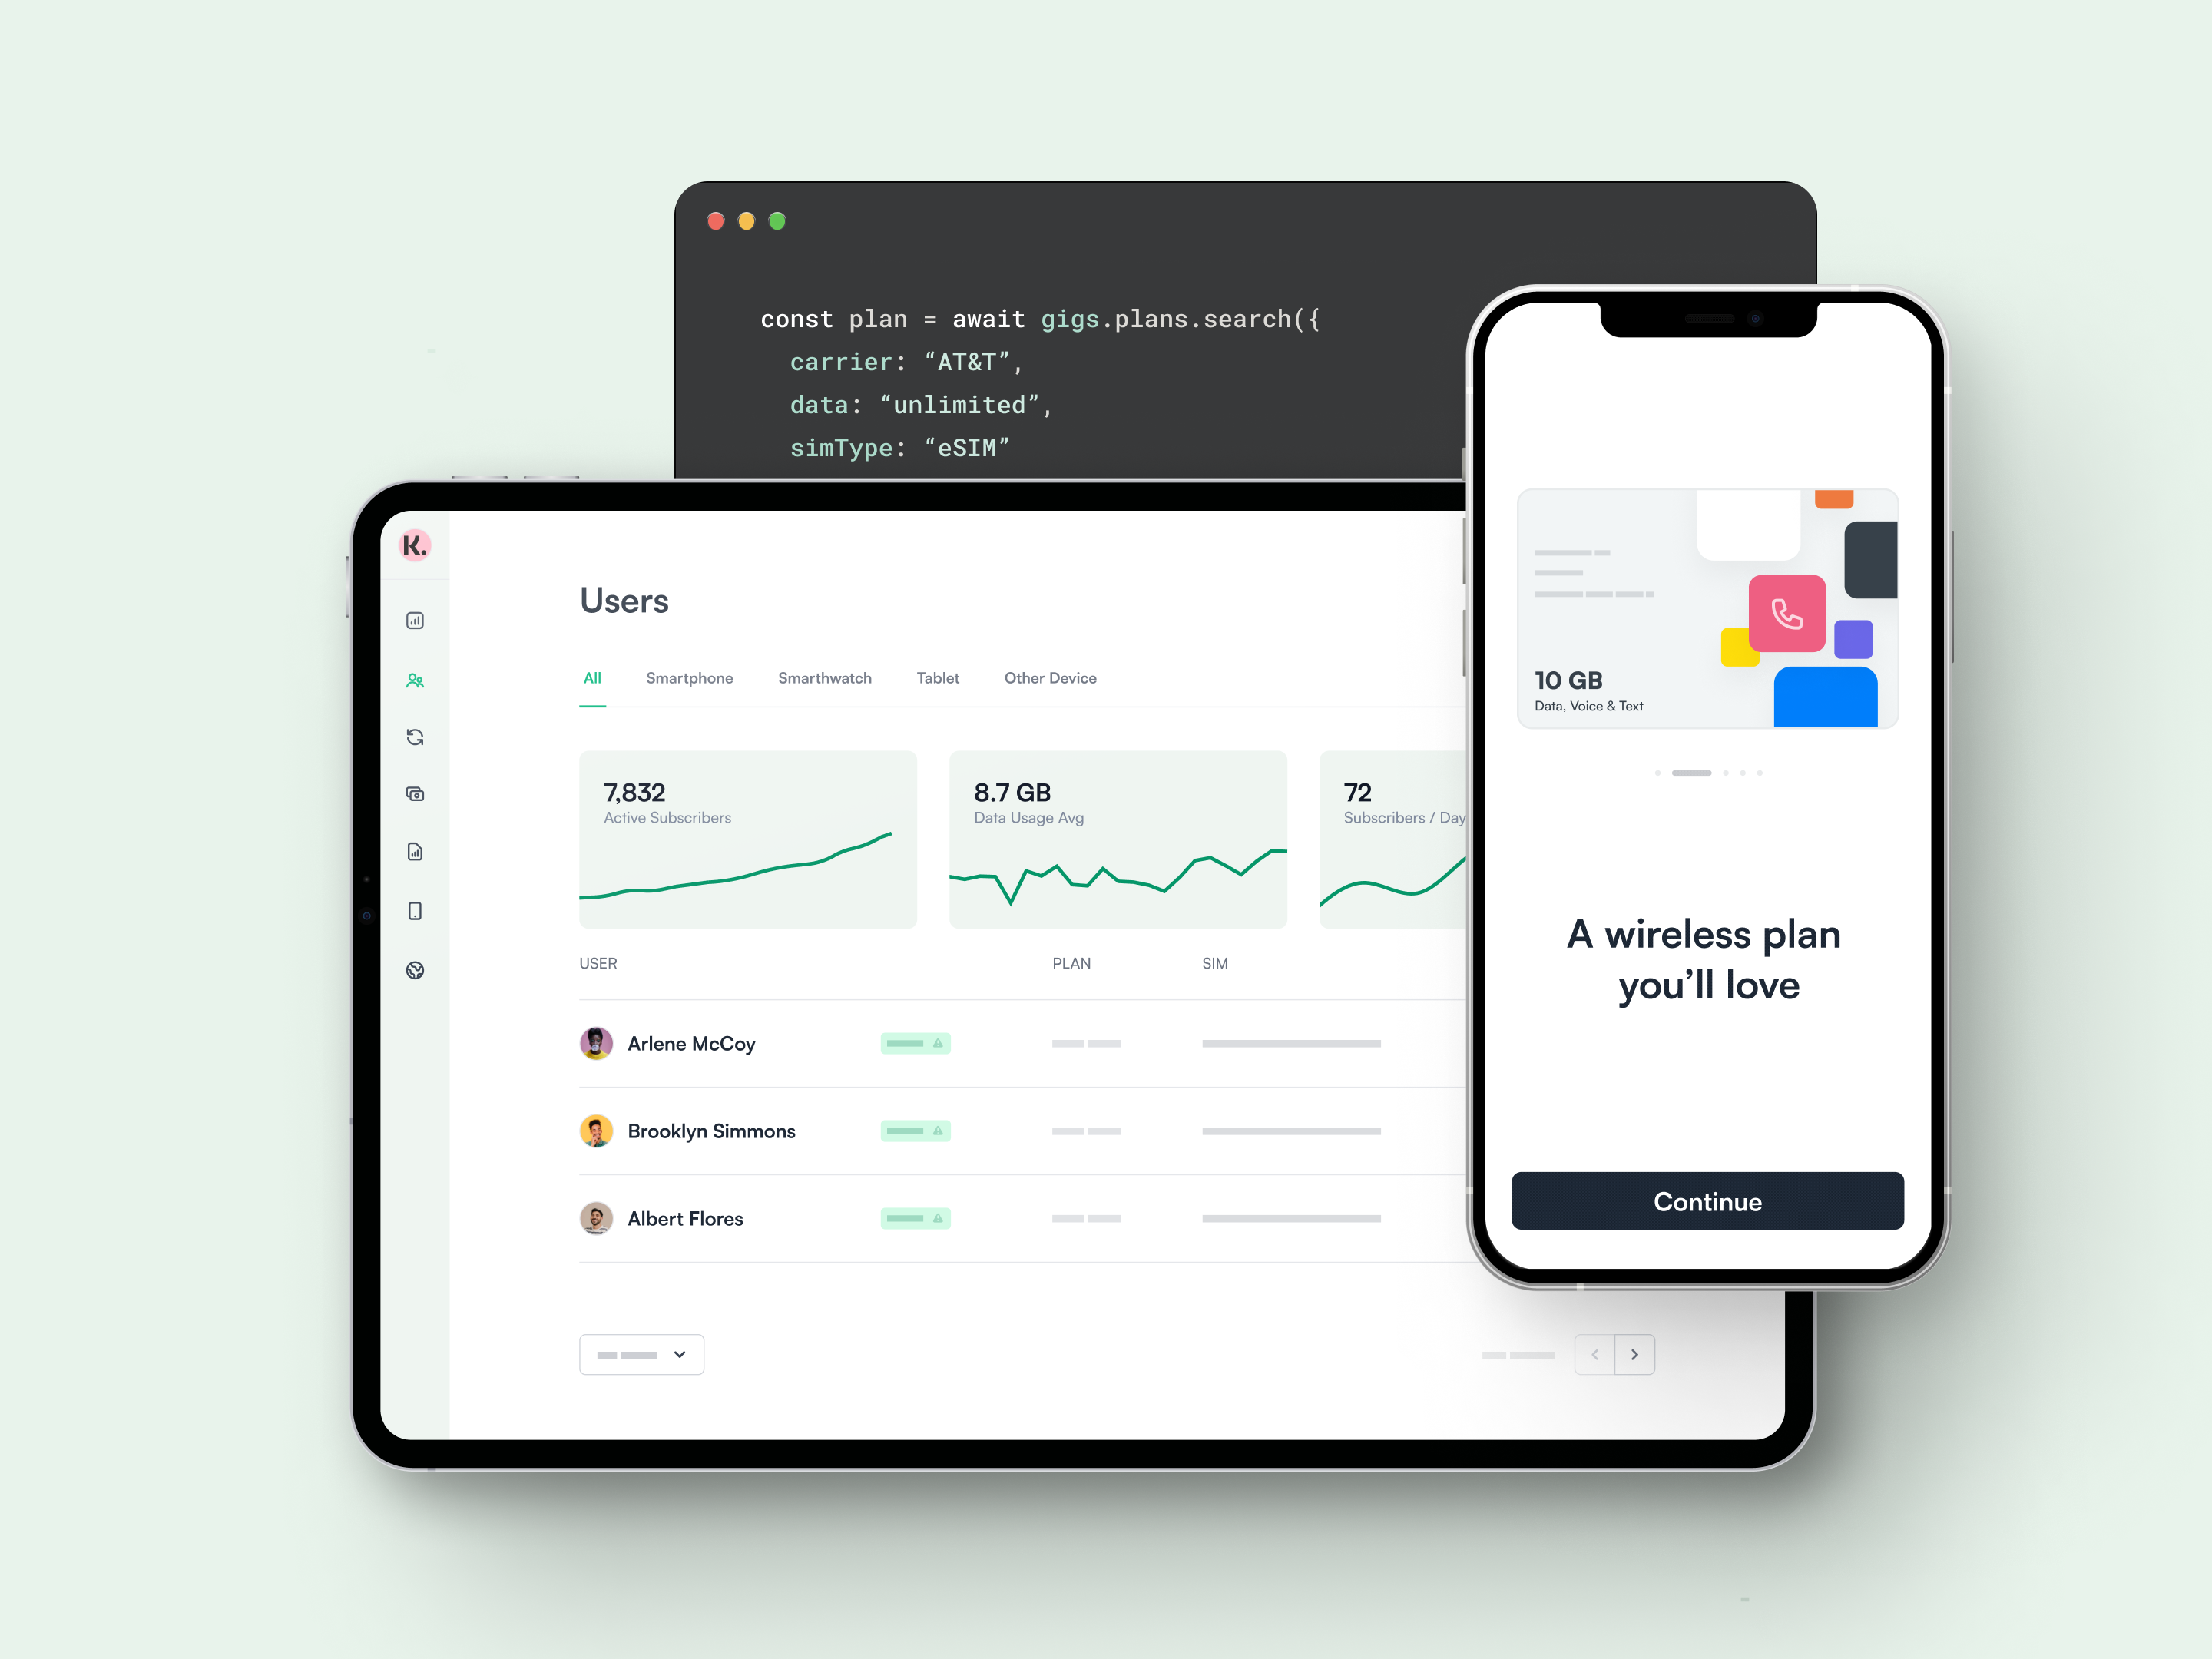 Gigs Dashboard is a user-friendly no-code interface to manage plans and subscriptions on the Gigs API. With Gigs Dashboard, customers get a full overview of all subscriptions, payments and analytics in one simple interface.